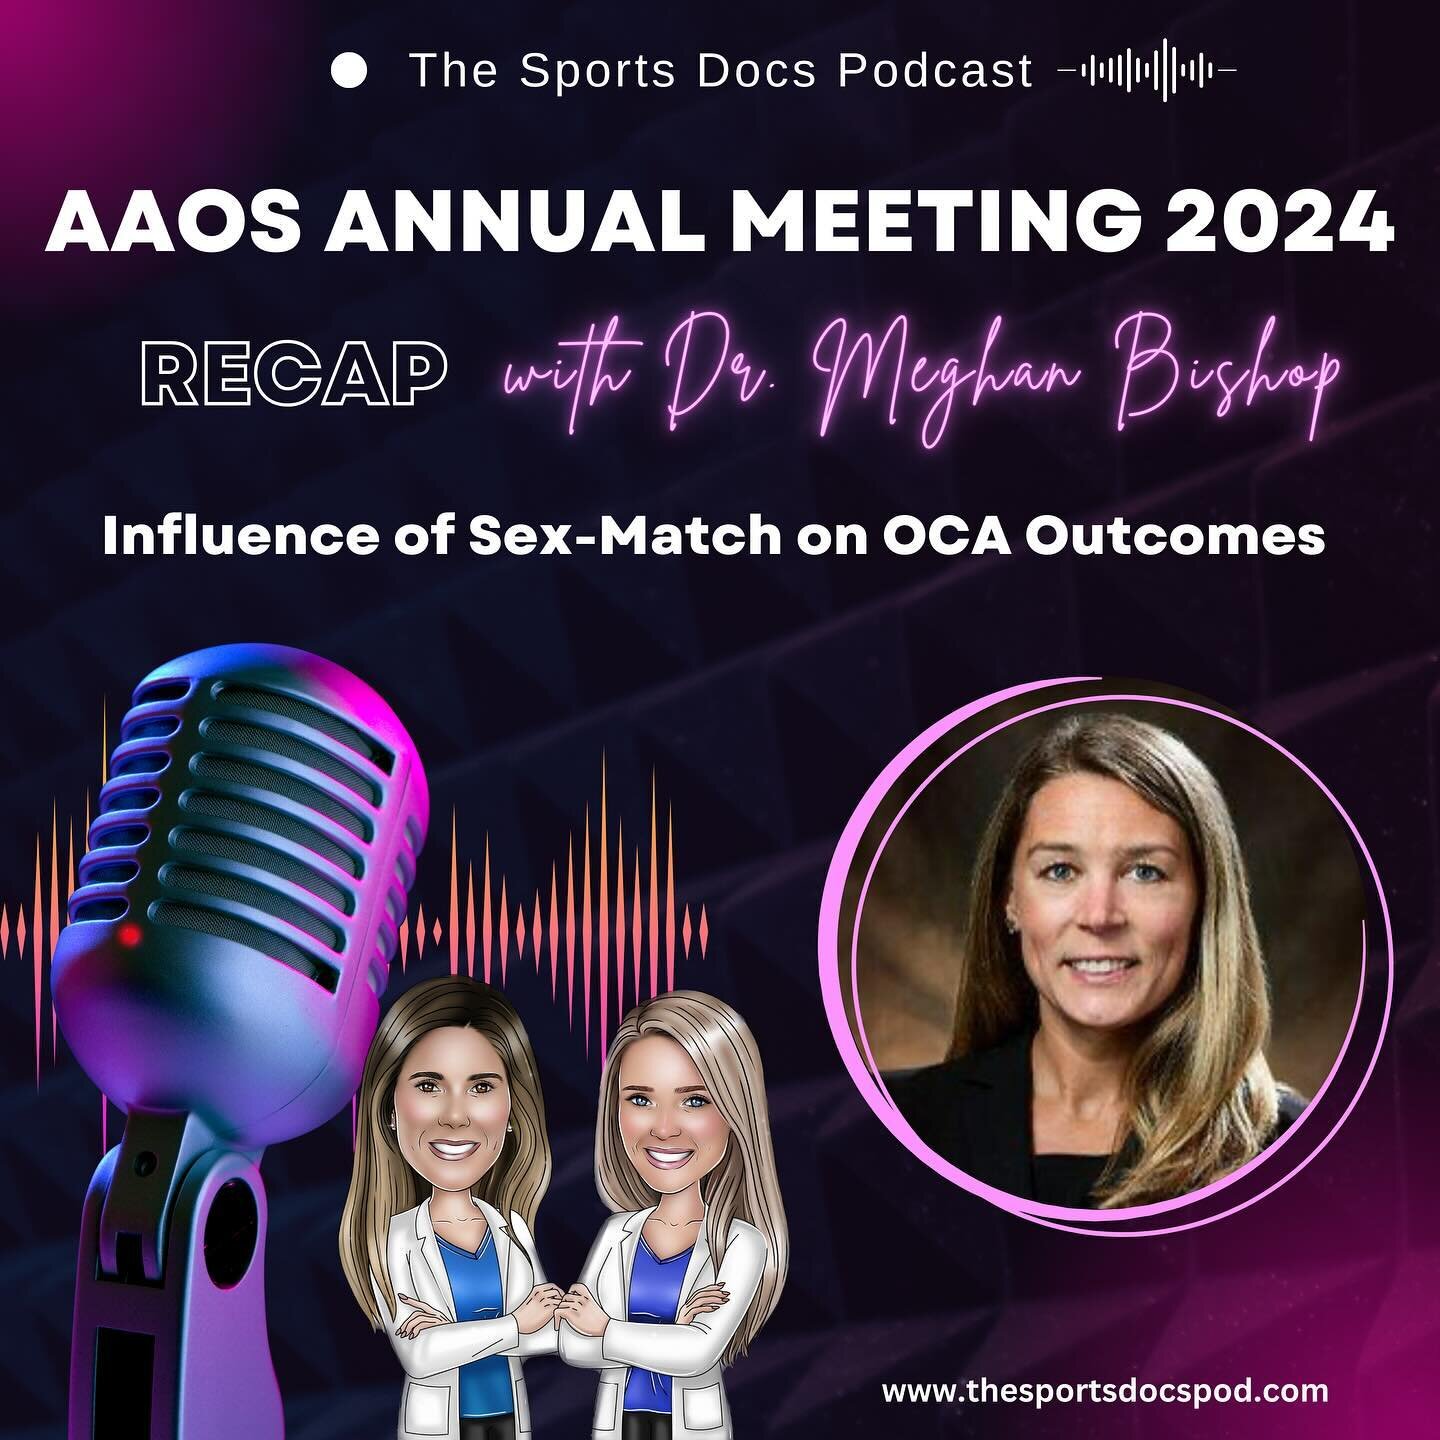 ✨ NEW episode is LIVE! ✨

We&rsquo;re continuing with our special series of episodes to recap the newest research presented at the American Academy of Orthopaedic Surgeons Annual Meeting held this month in San Francisco.

Were joined again by Dr. Meg